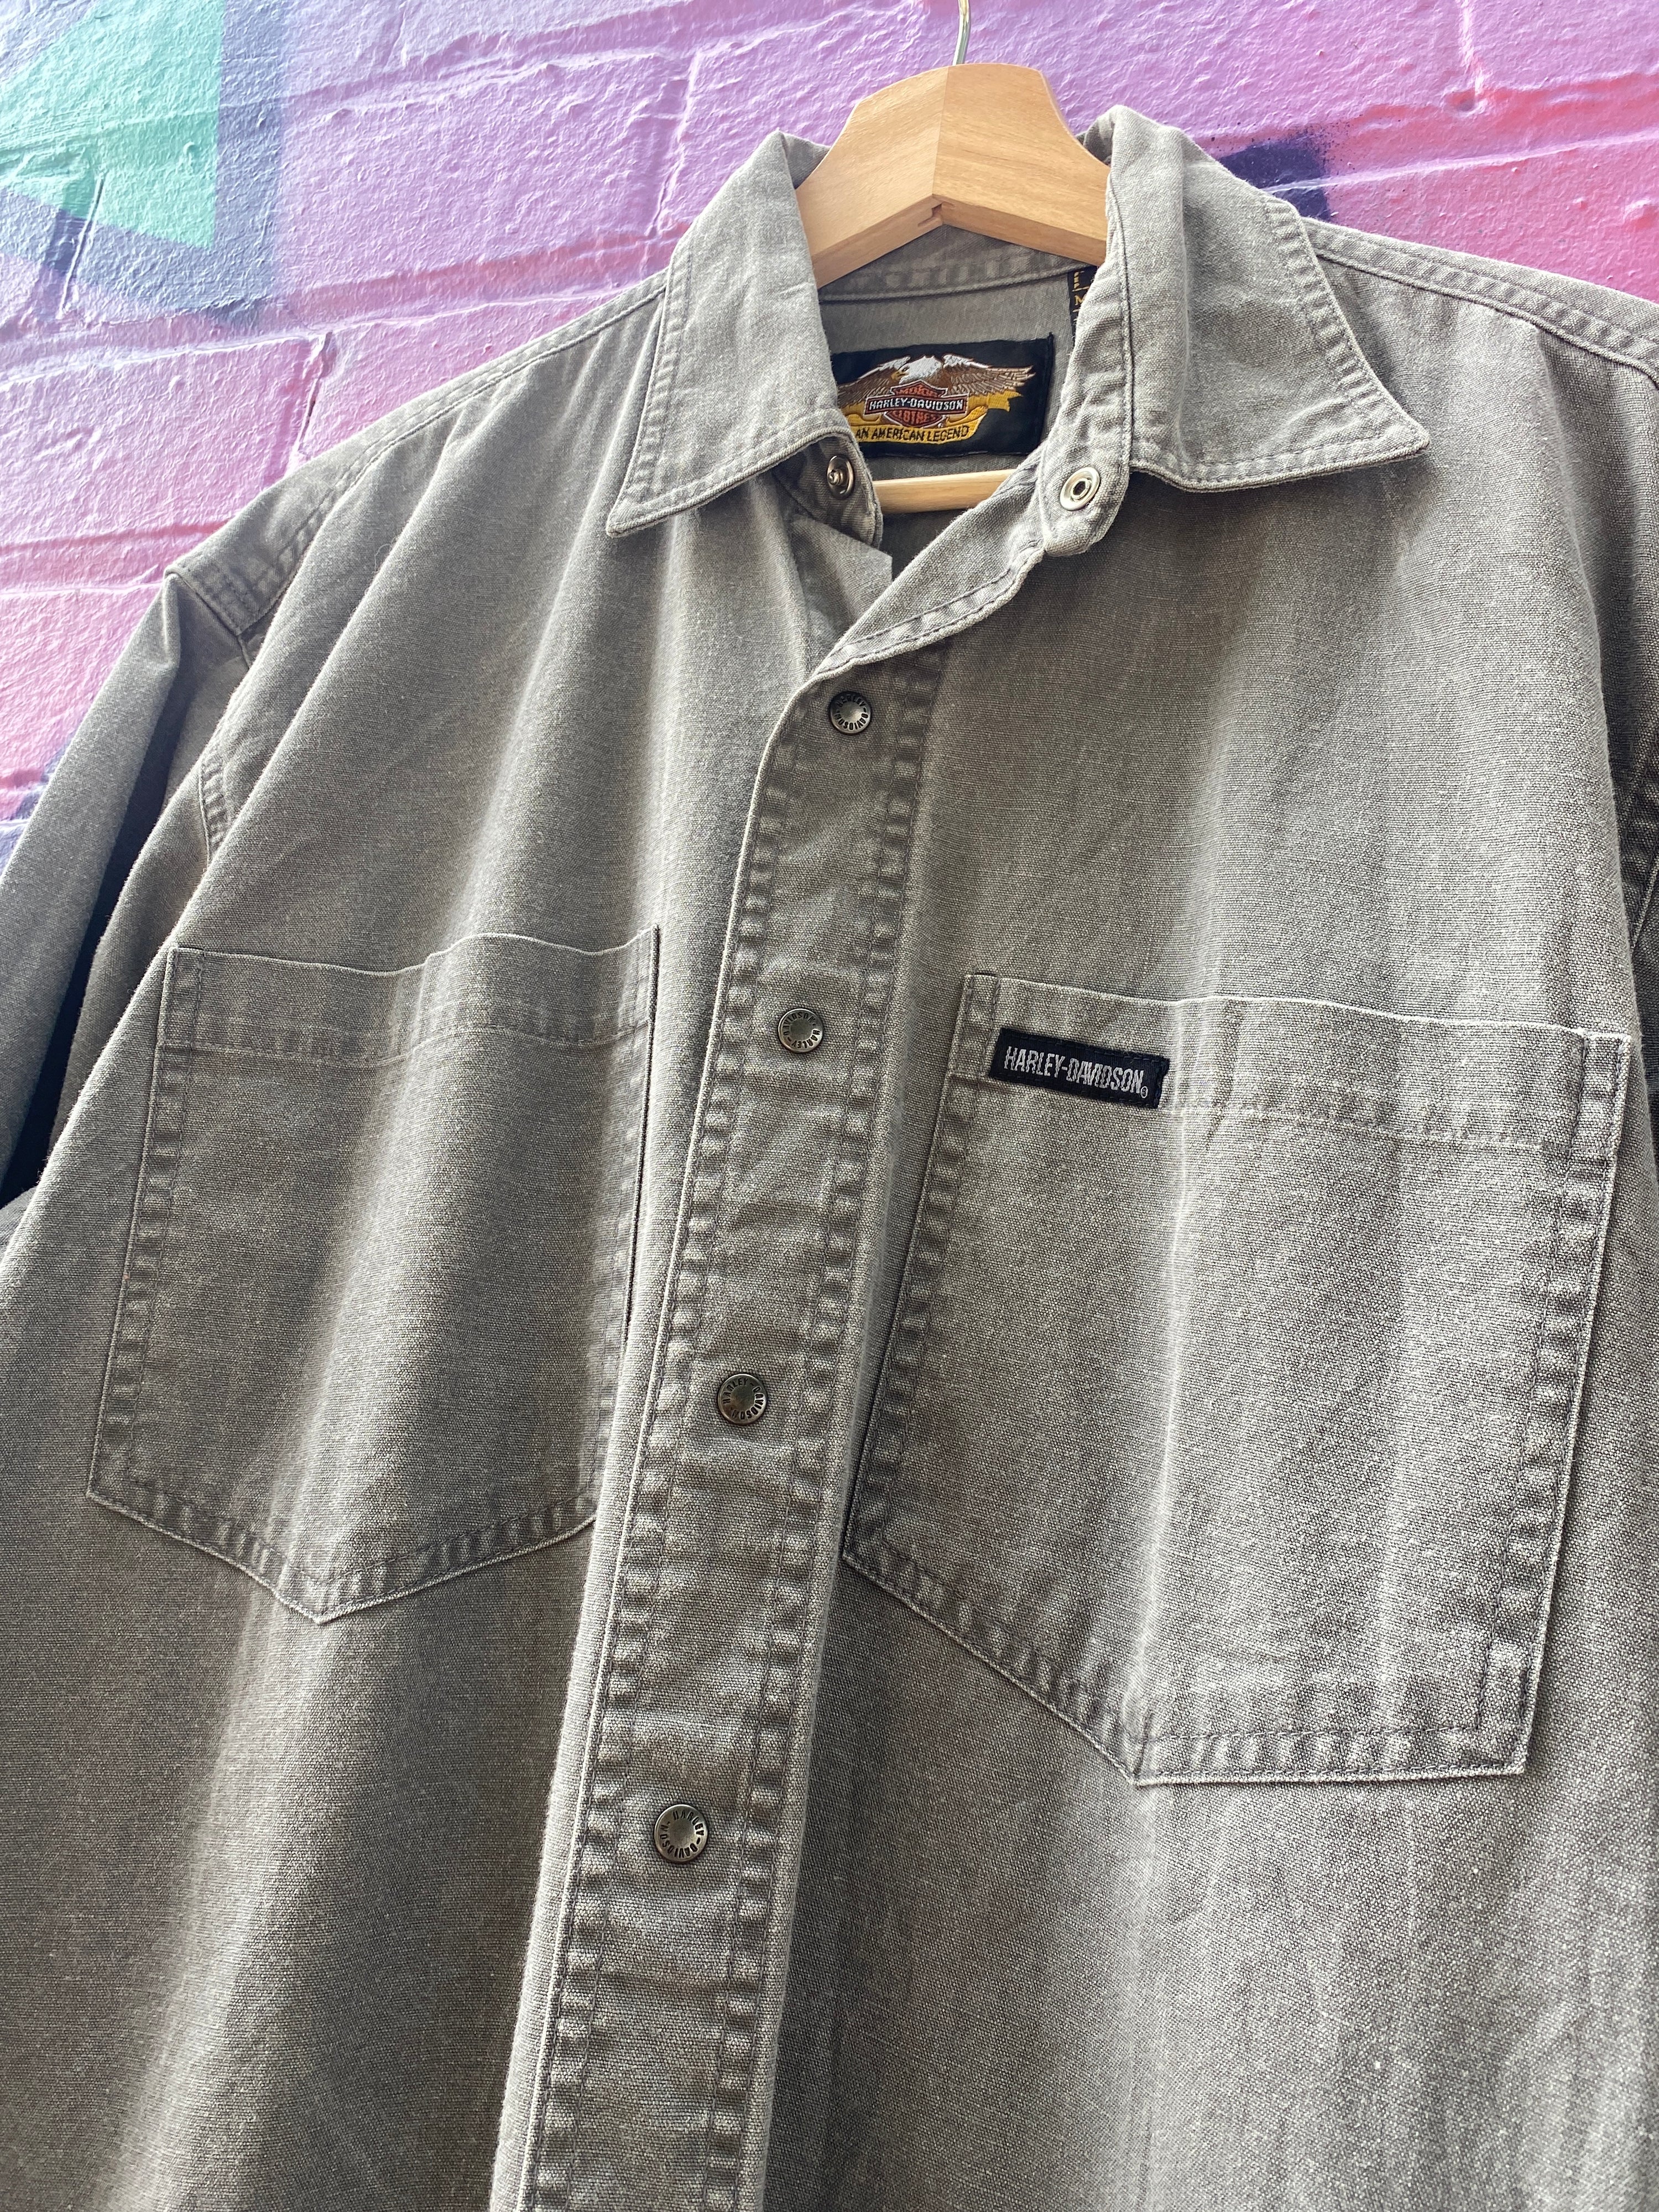 S - HD LS Button Up